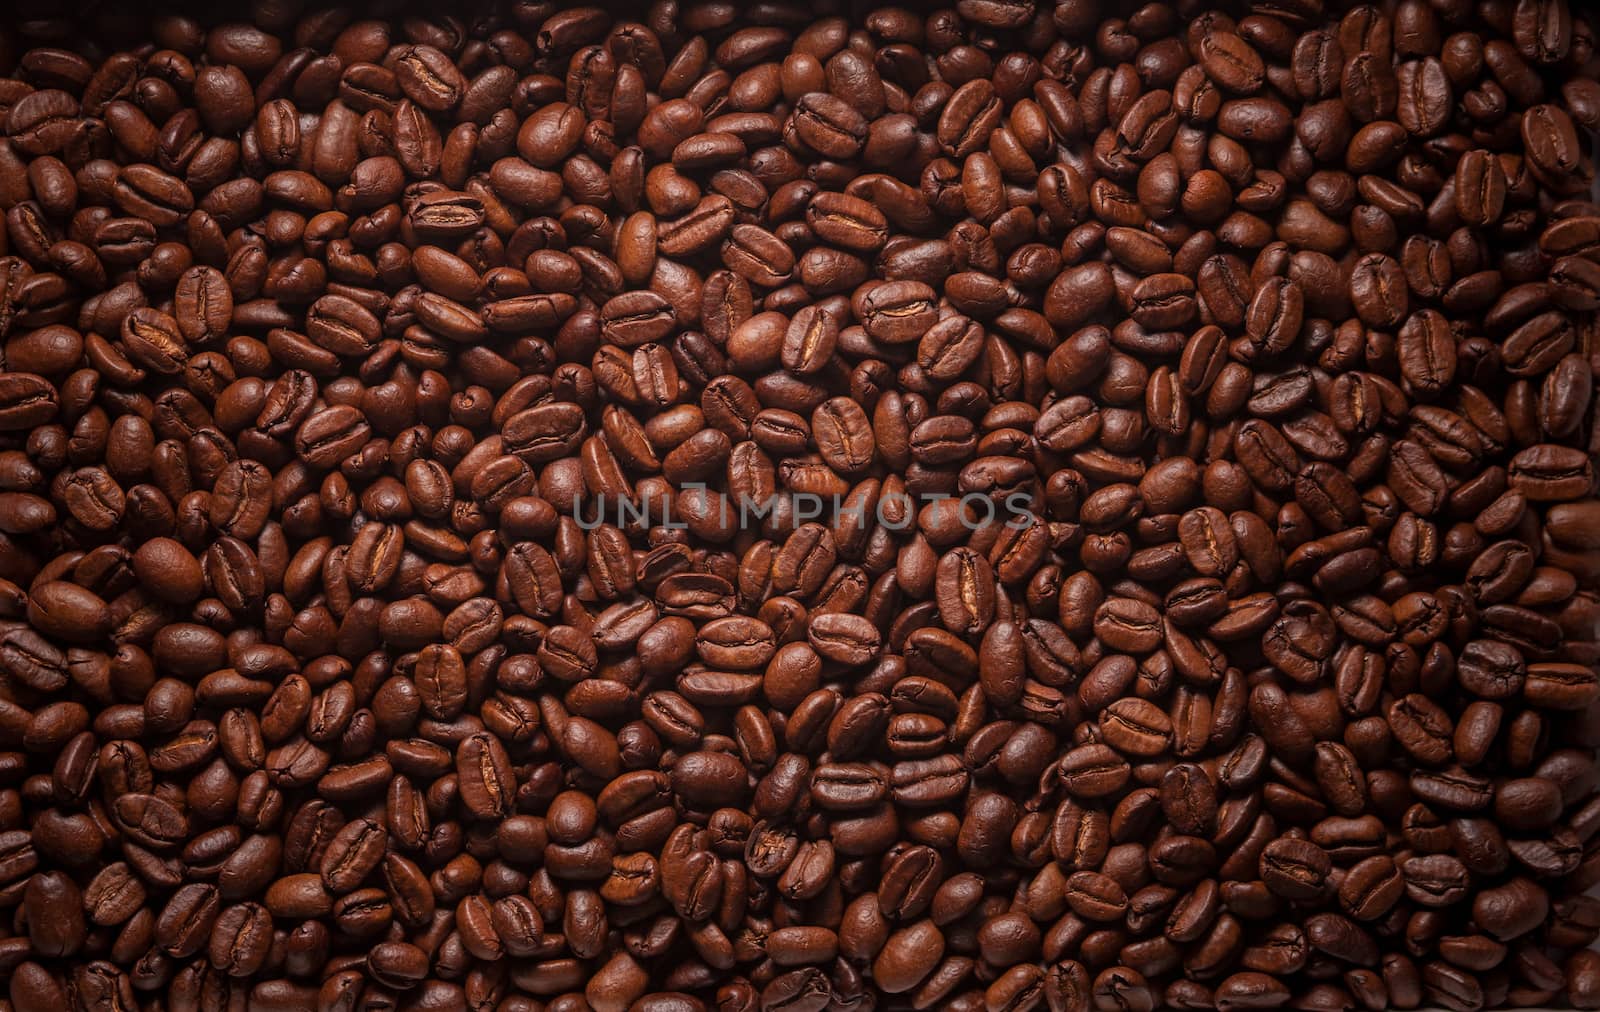 Brown roasted coffee beans texture close up